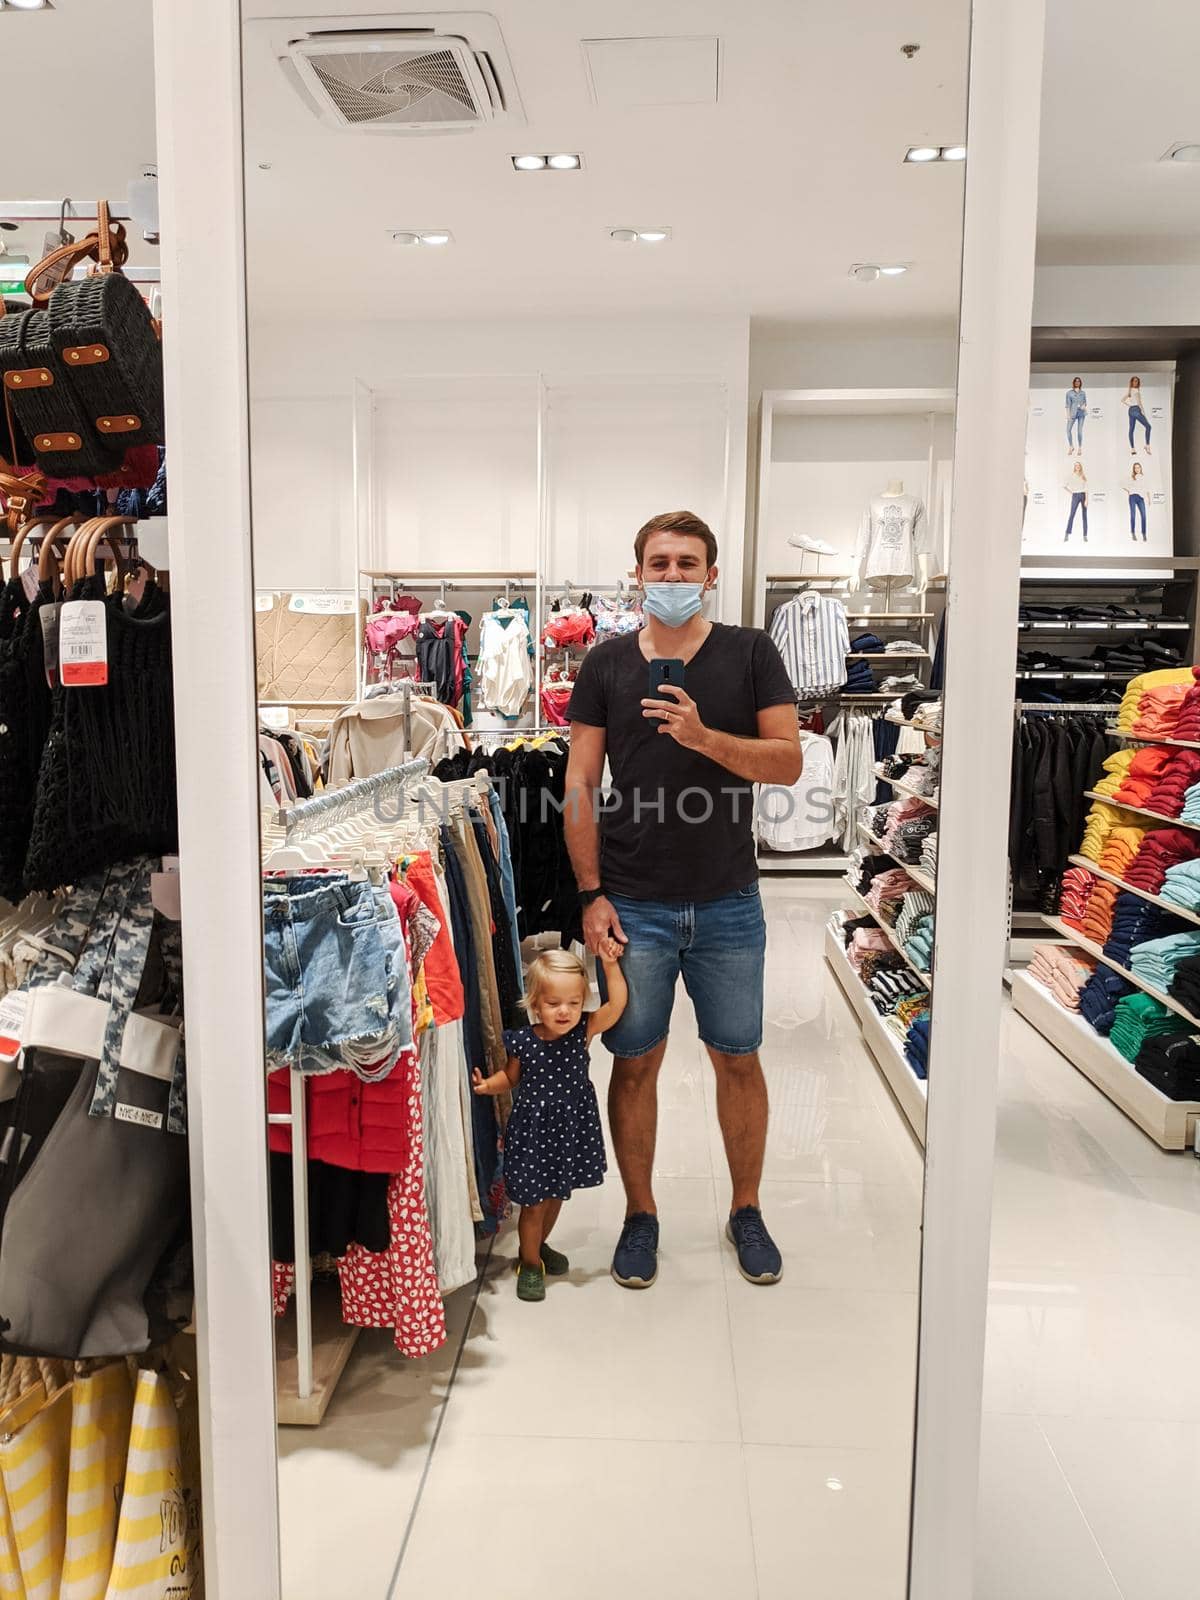 Dad with a little girl is photographed in a mirror in a clothing store by Nadtochiy